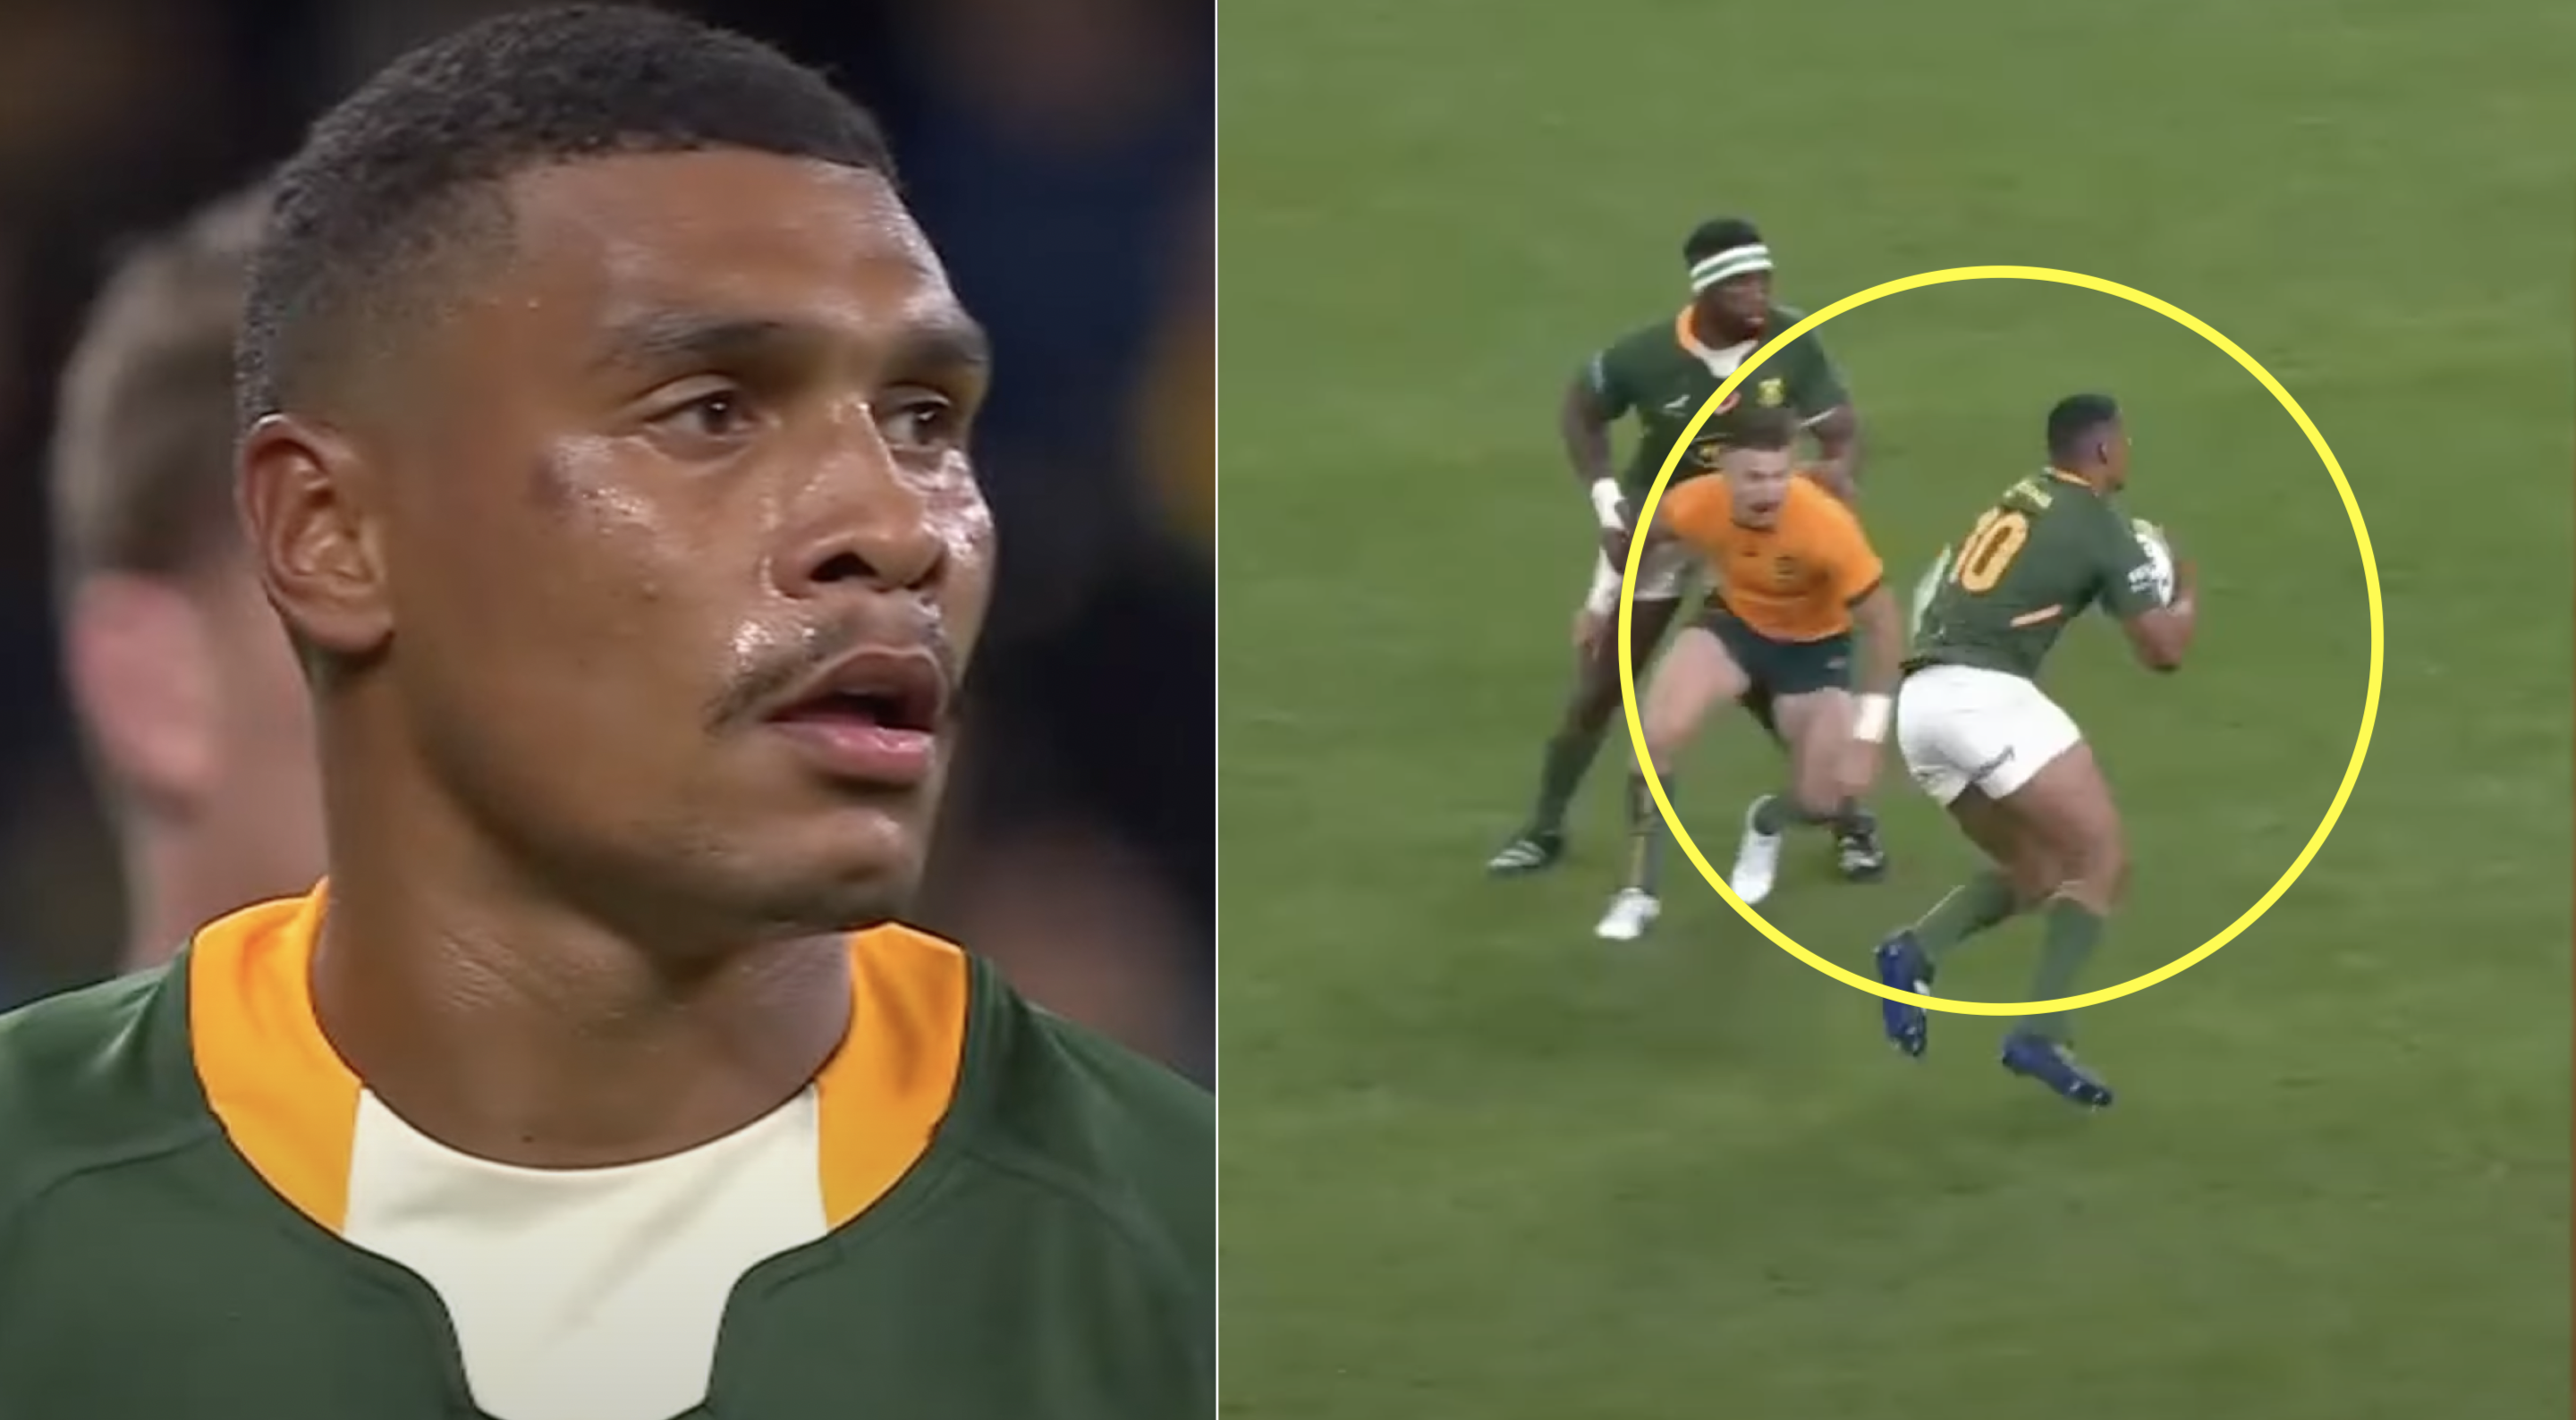 The Internet can't get enough of Damian Willemse's footwork against Australia